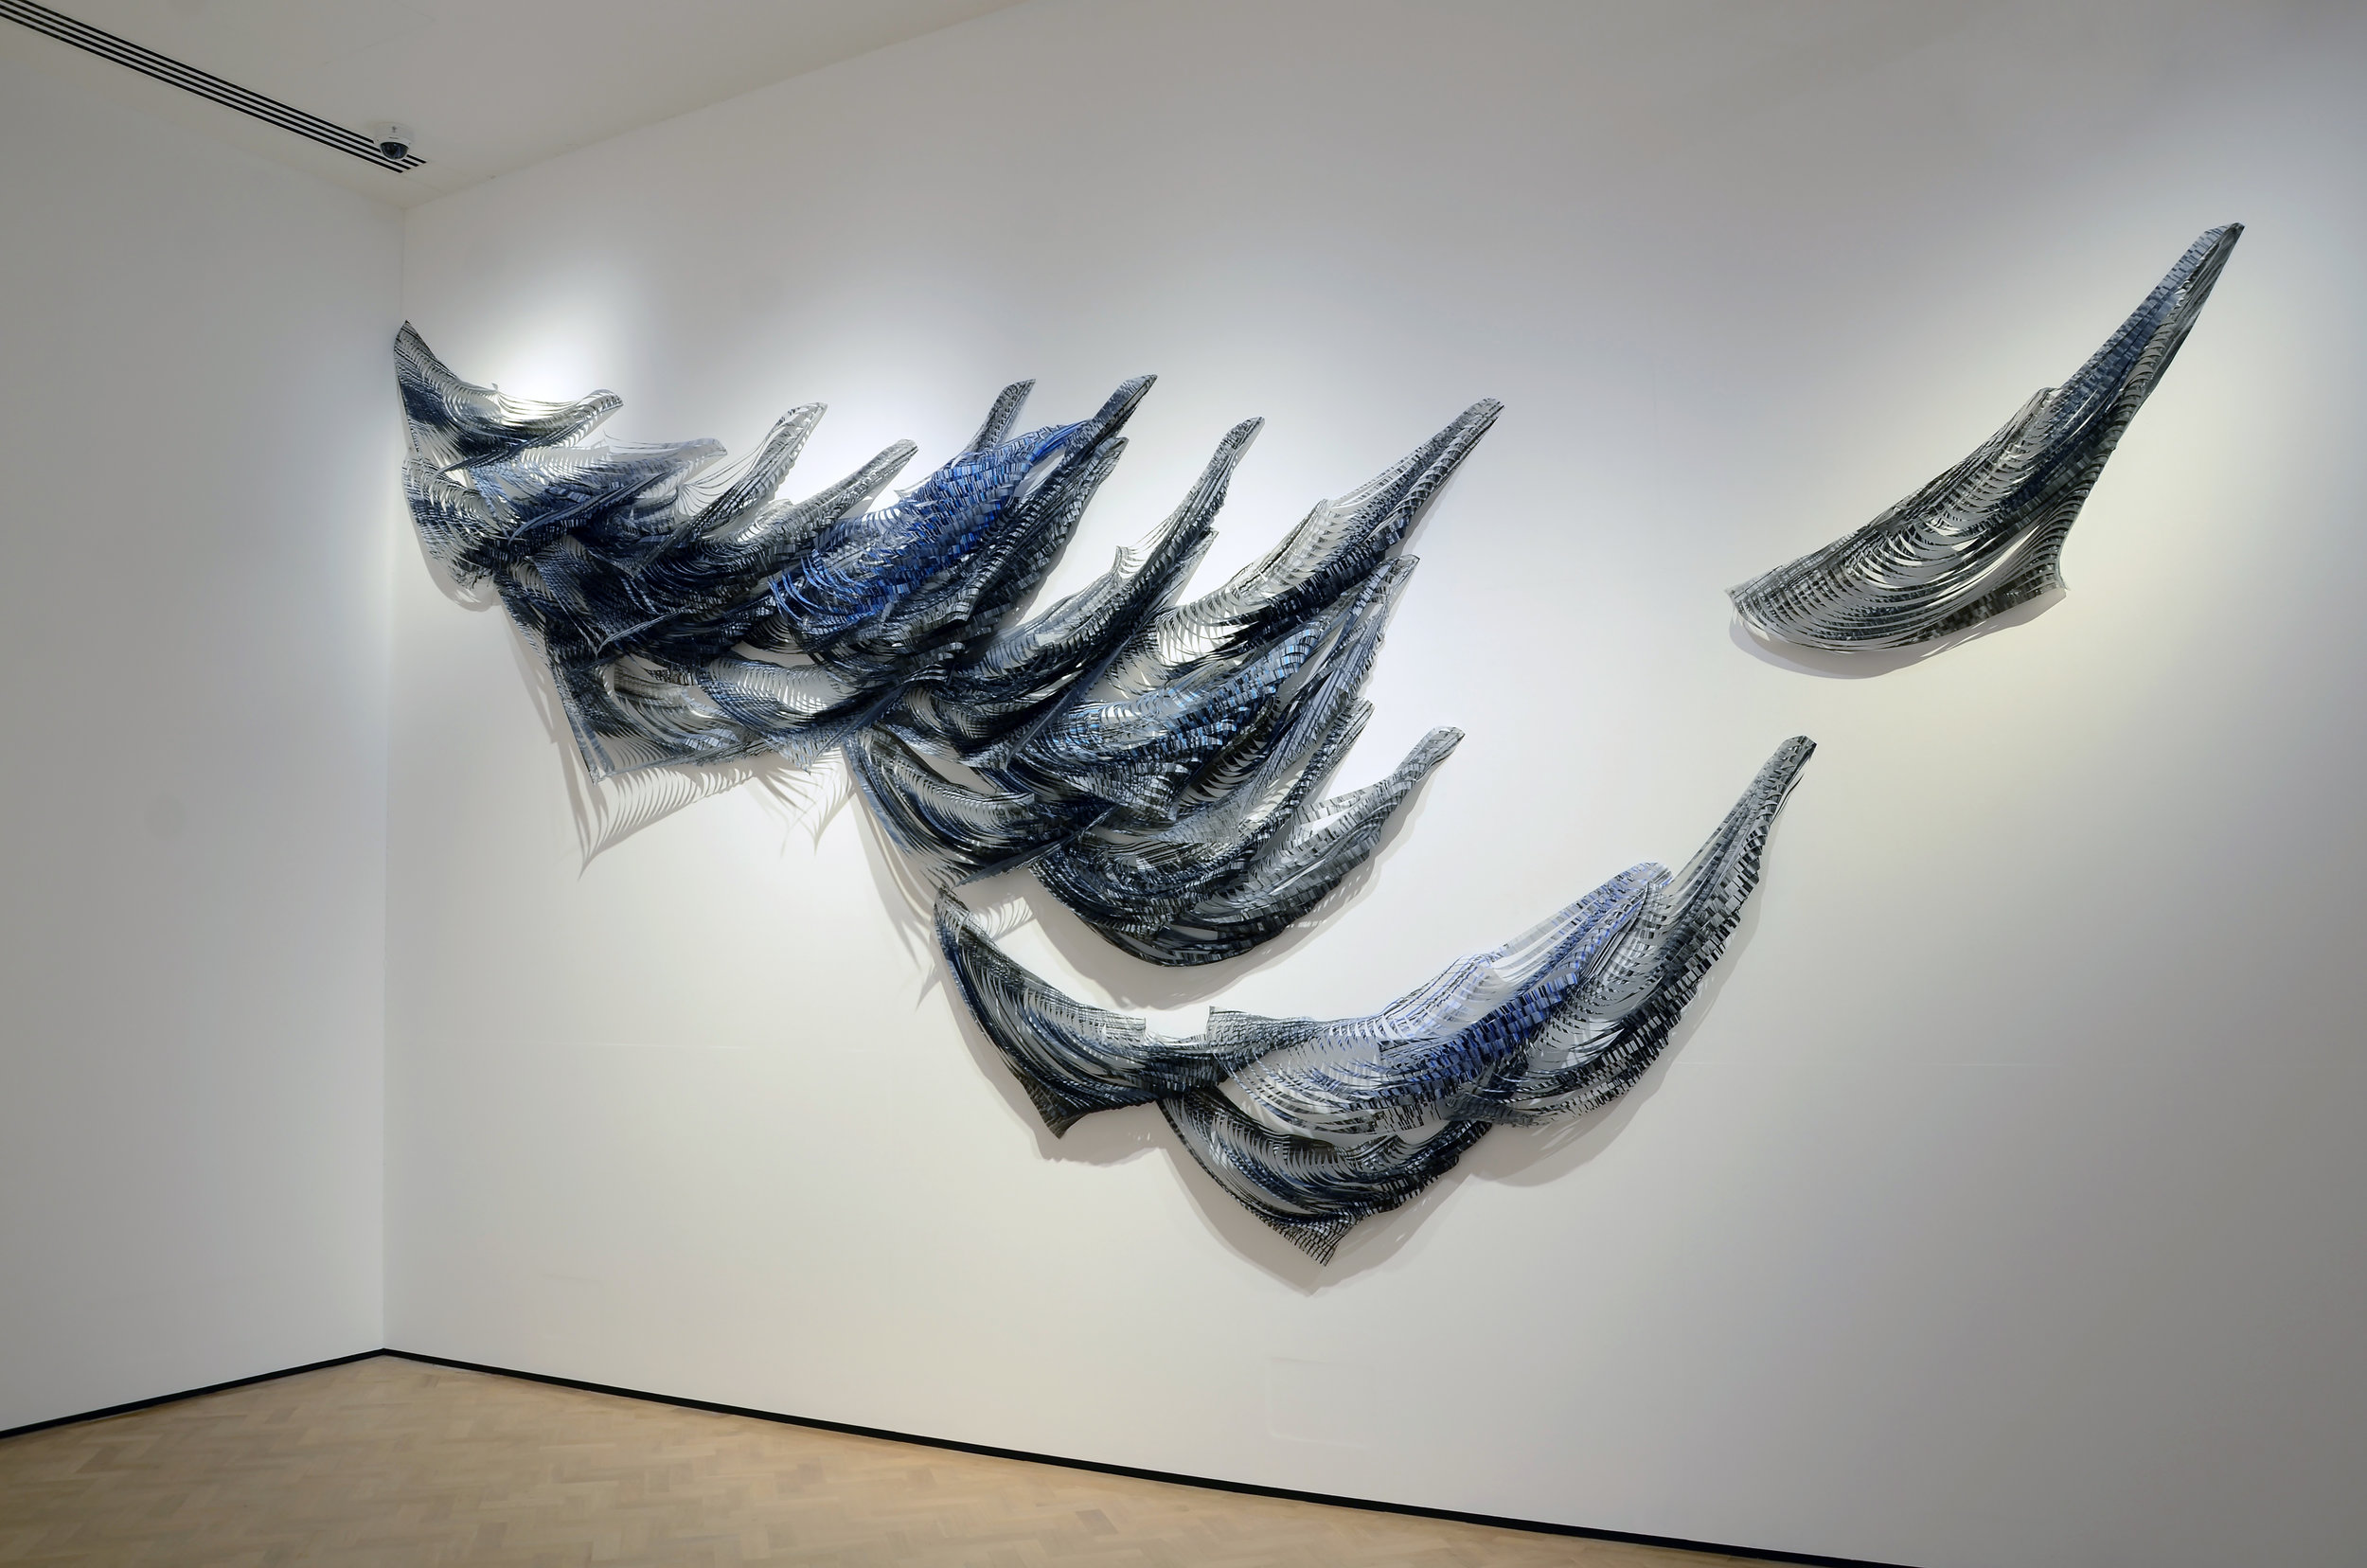  Jaanika Peerna   Sublime Ooze   large wall installation (dimensions site specific), pigment and water on hand cut mylar in 40 elements   2018 